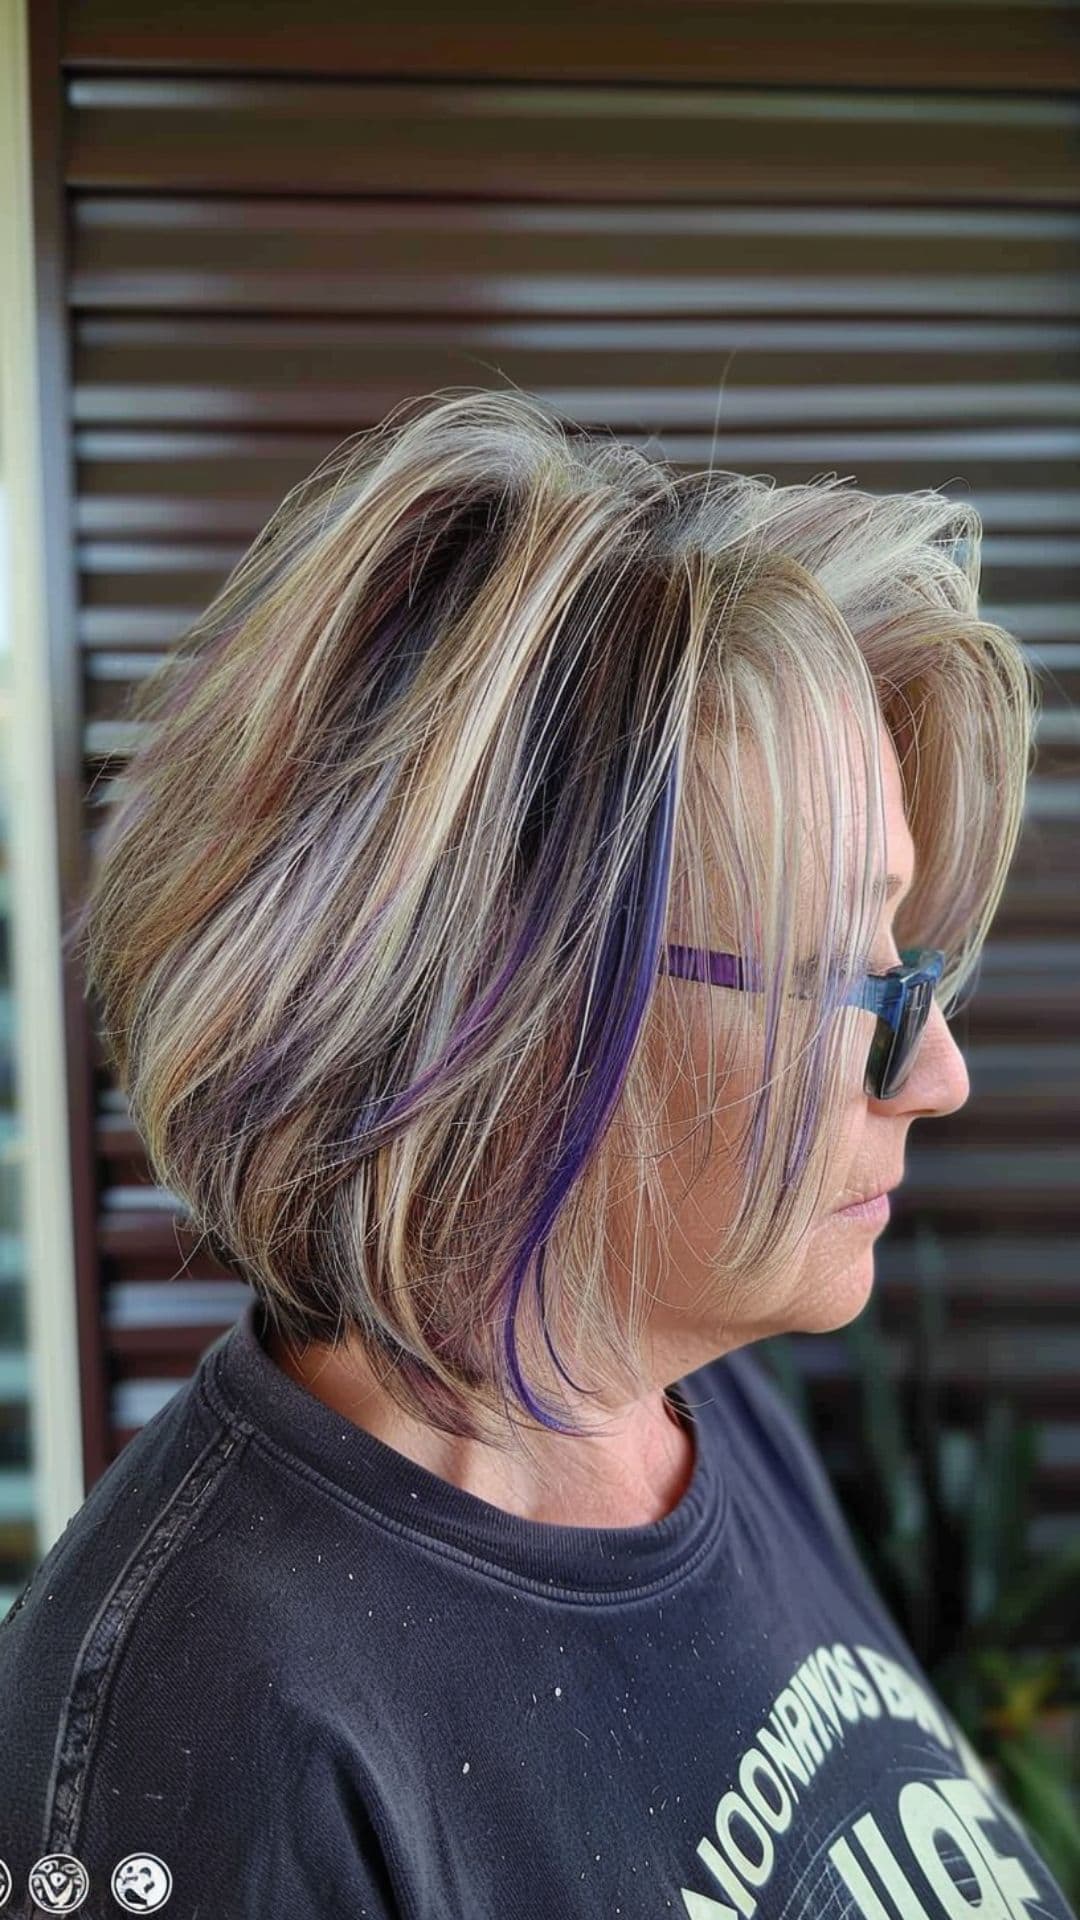 An old woman modelling a razored bob with purple highlights.